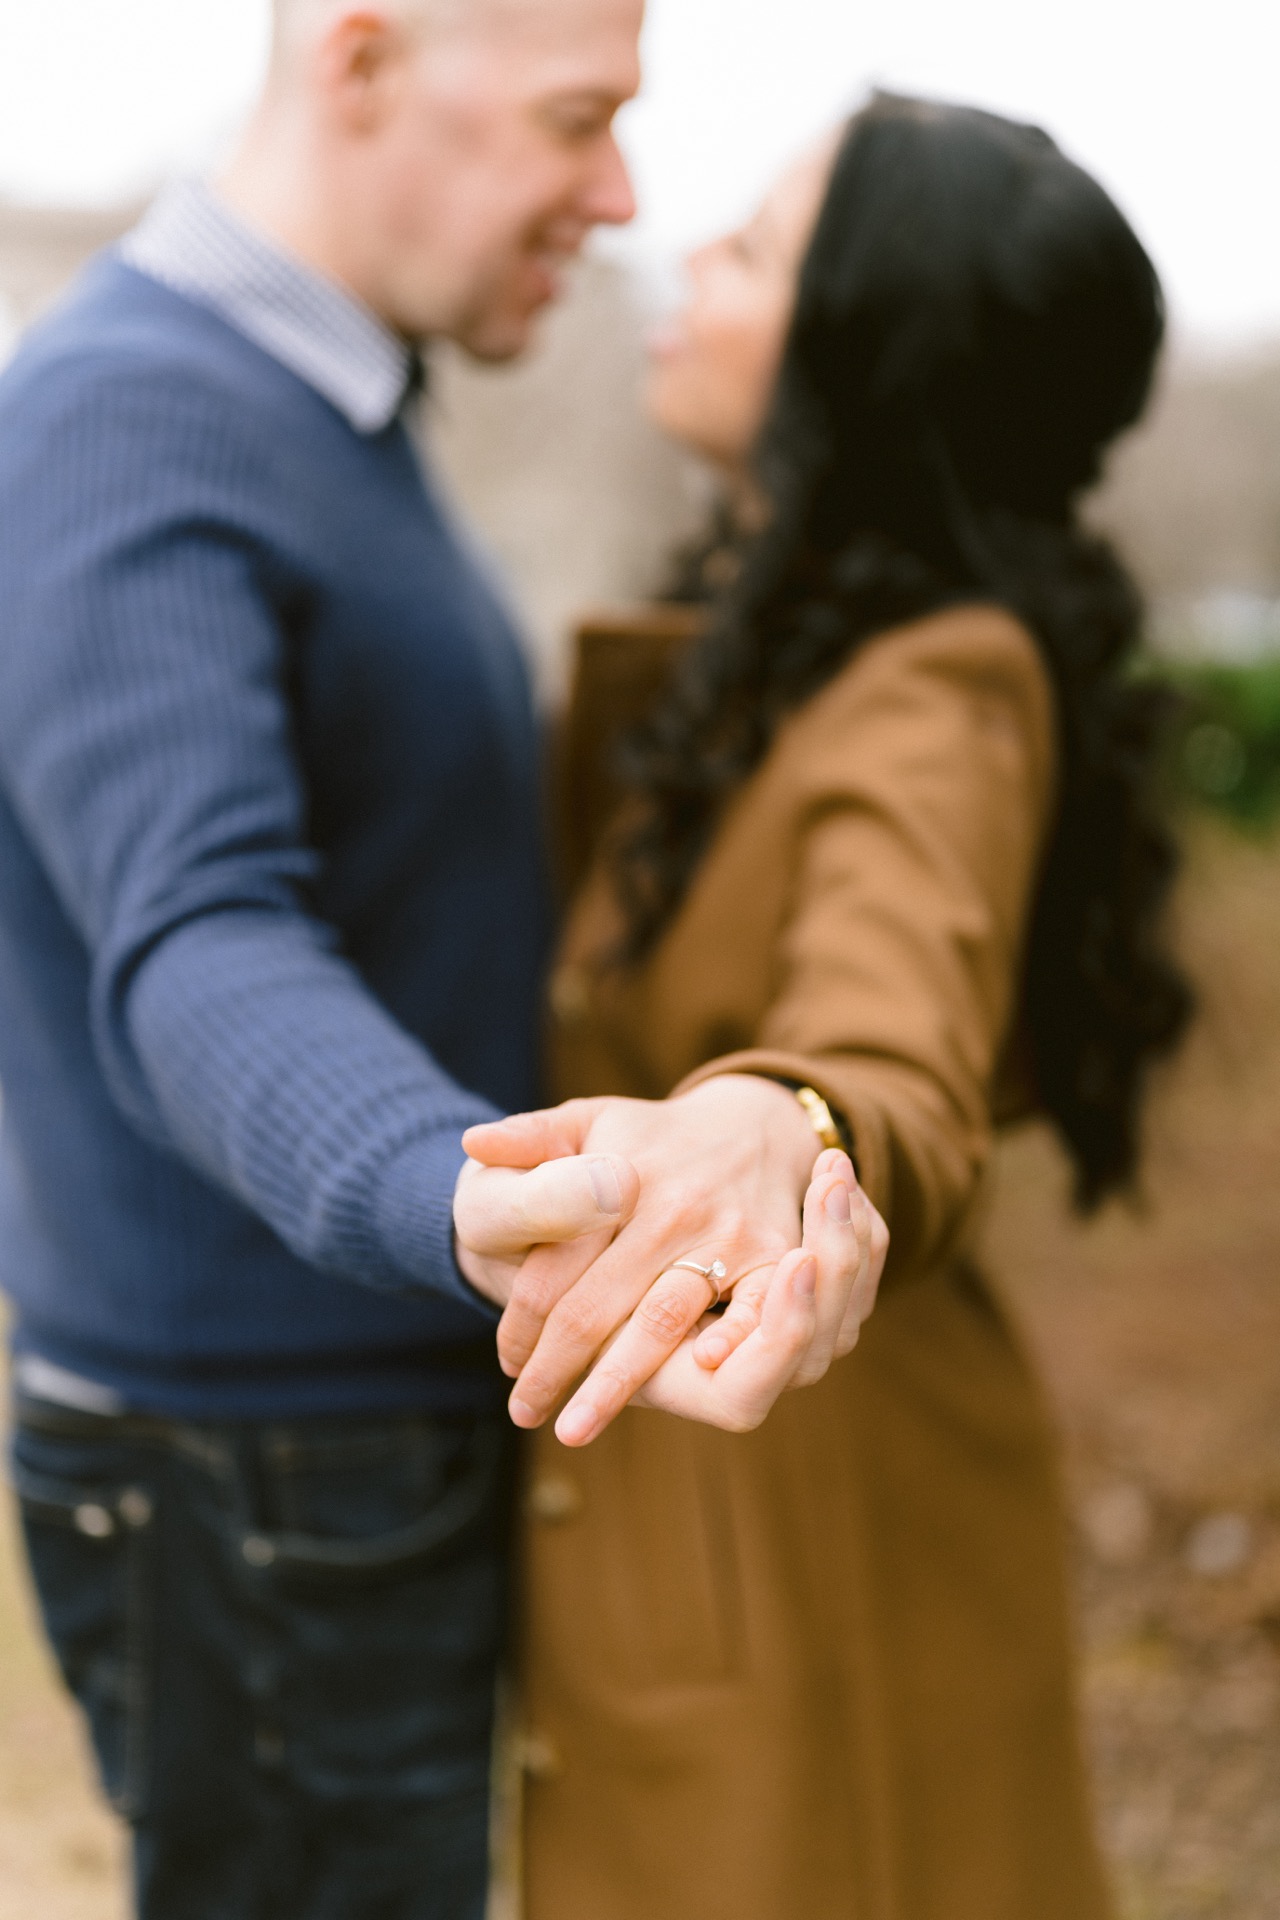 A couple showcasing engagement rings while standing close to each other with a blurred background.